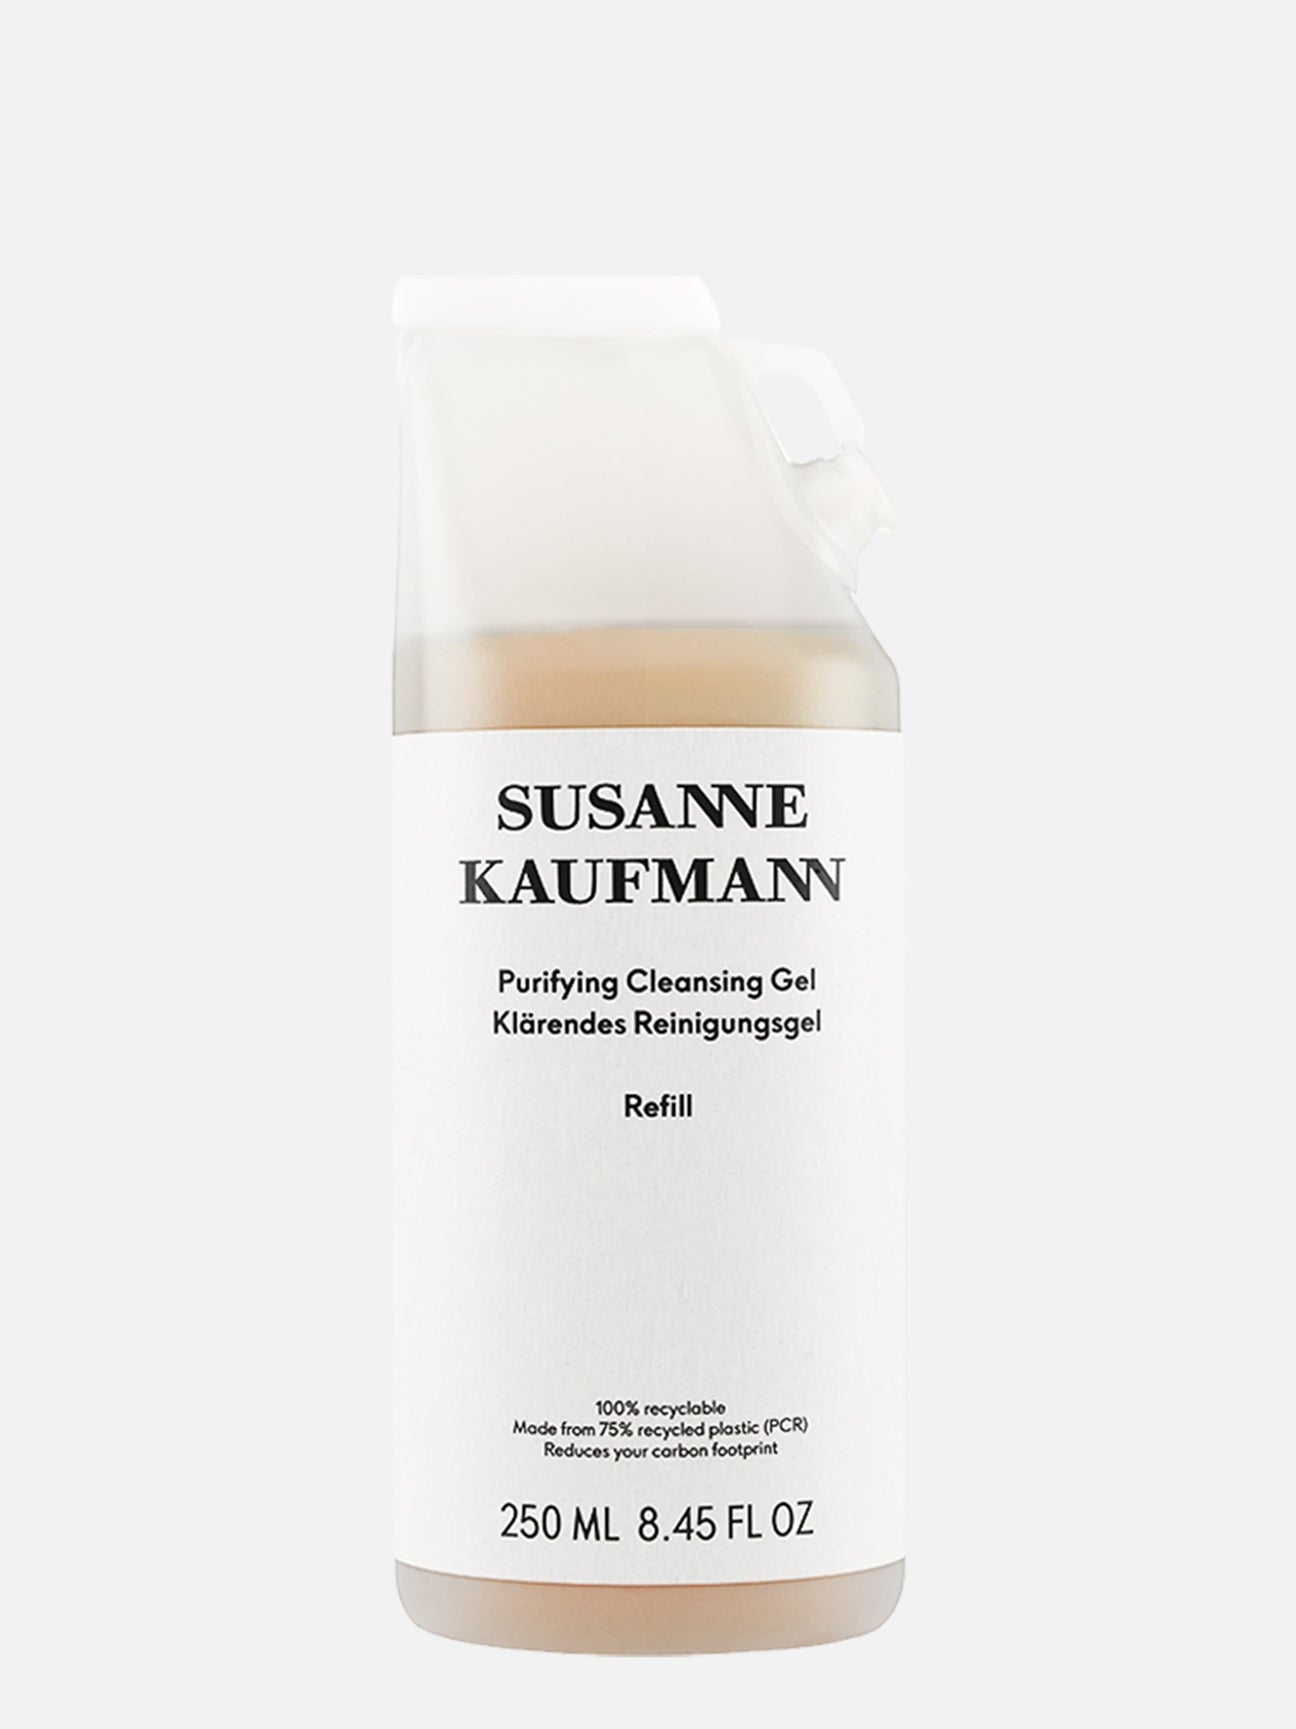 Purifying Cleansing Gel Refill - 250ml